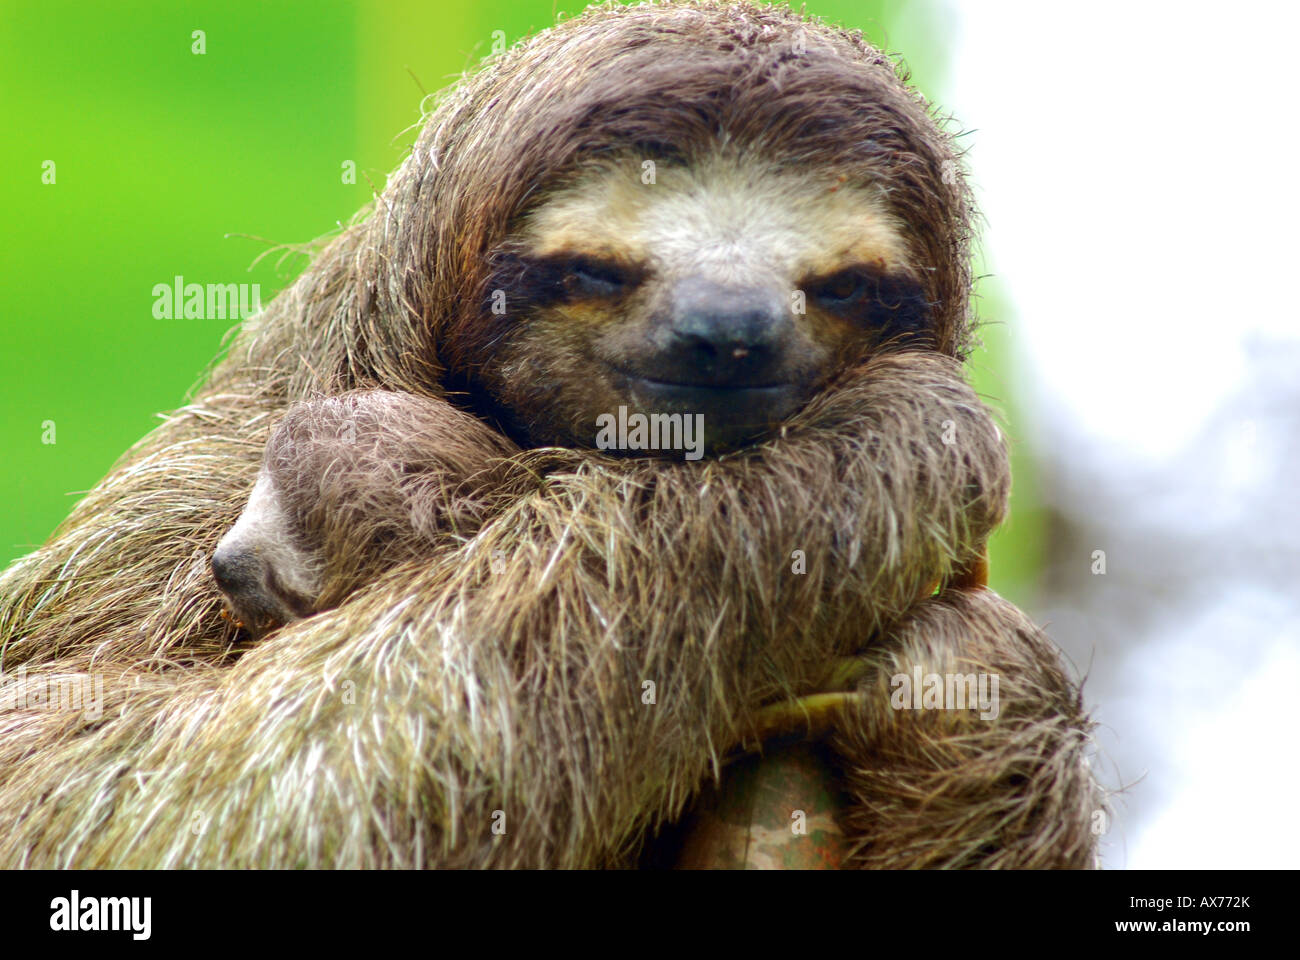 Mother and baby sloth in the jungles of Panama. Three toed sloth Stock Photo